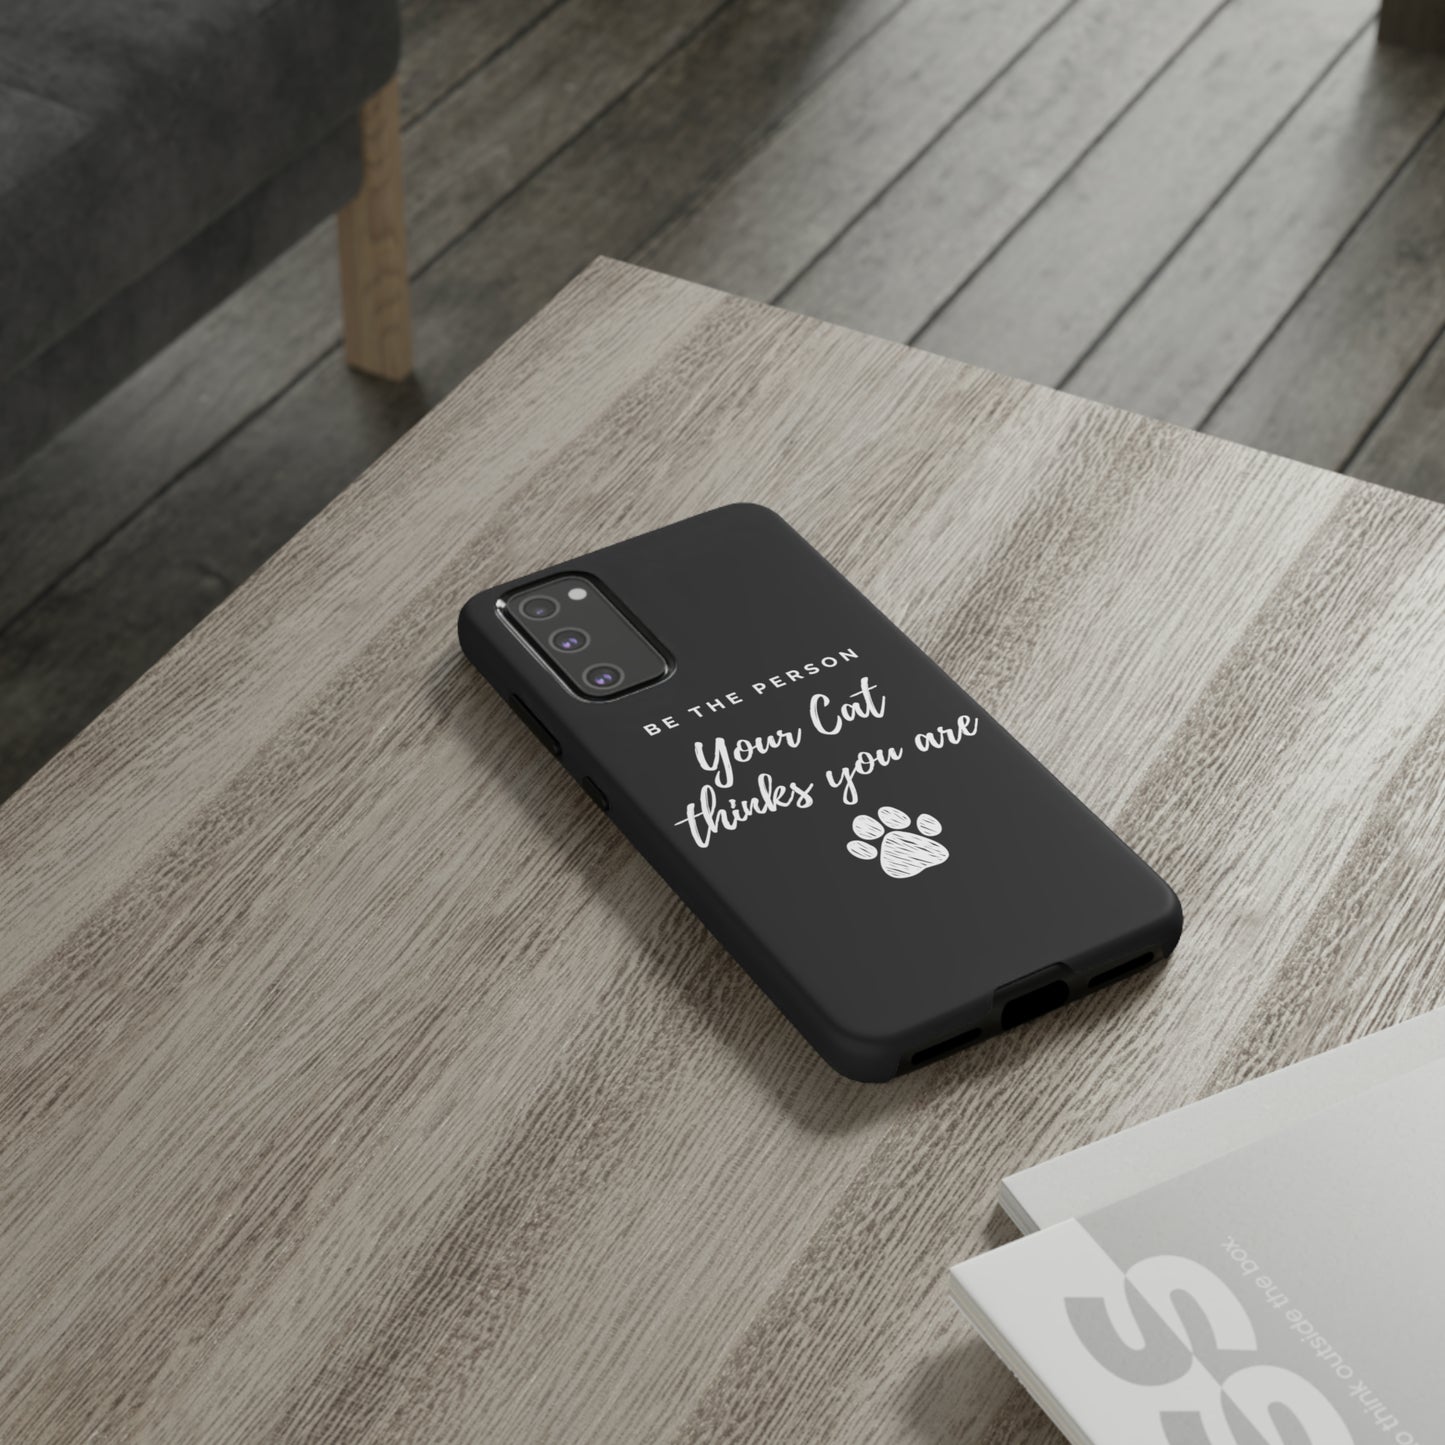 Be the person your cat thinks you are Phone Case